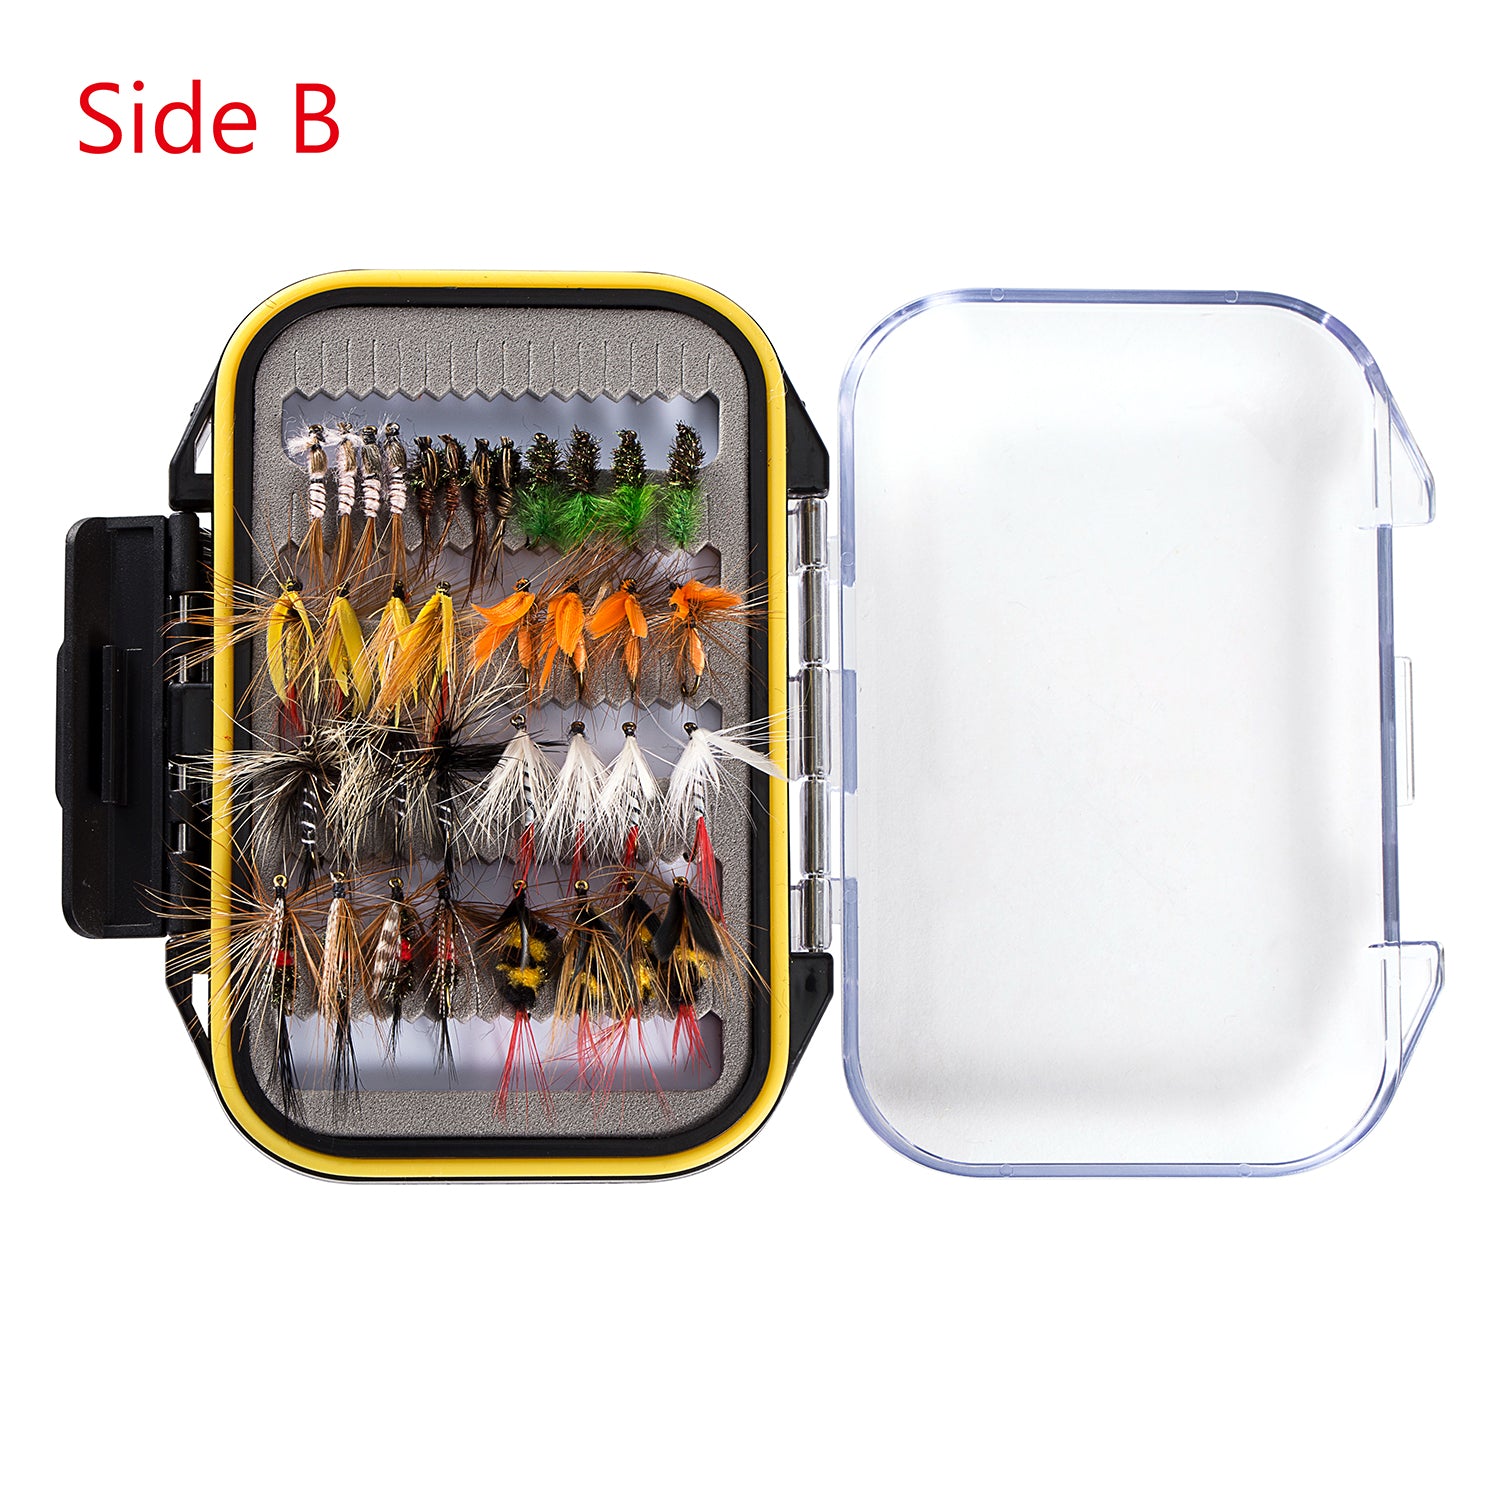 Bassdash Fly Fishing Flies Kit Fly Assortment Trout Bass Fishing with Fly Box, 36/64/72/76/80/96pcs with Dry/Wet Flies, Nymphs, Streamers